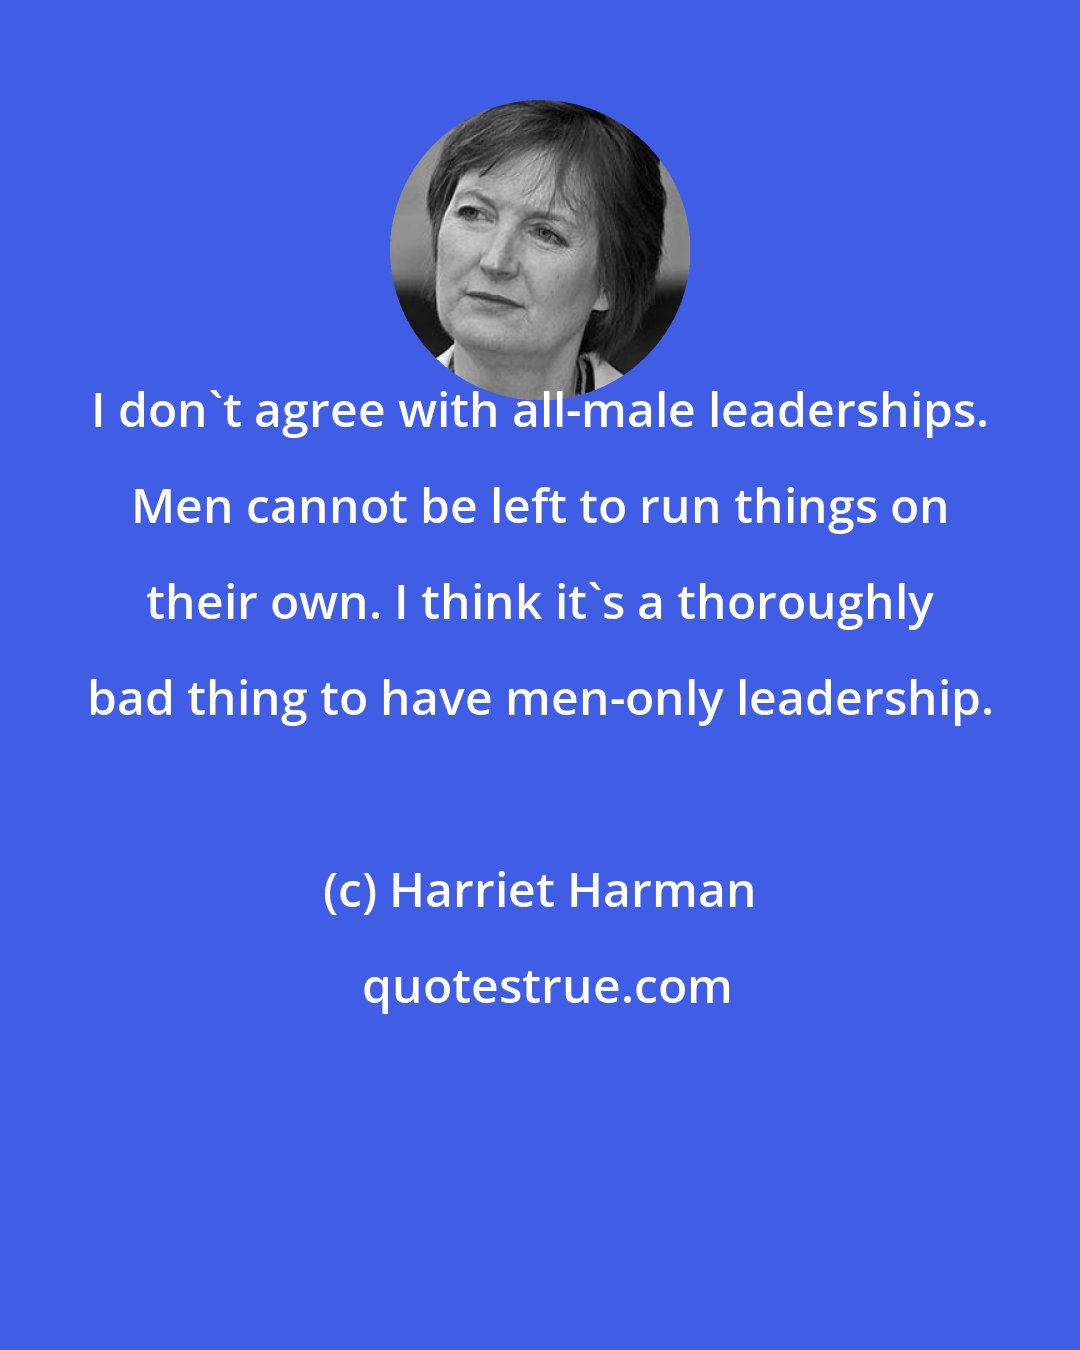 Harriet Harman: I don't agree with all-male leaderships. Men cannot be left to run things on their own. I think it's a thoroughly bad thing to have men-only leadership.